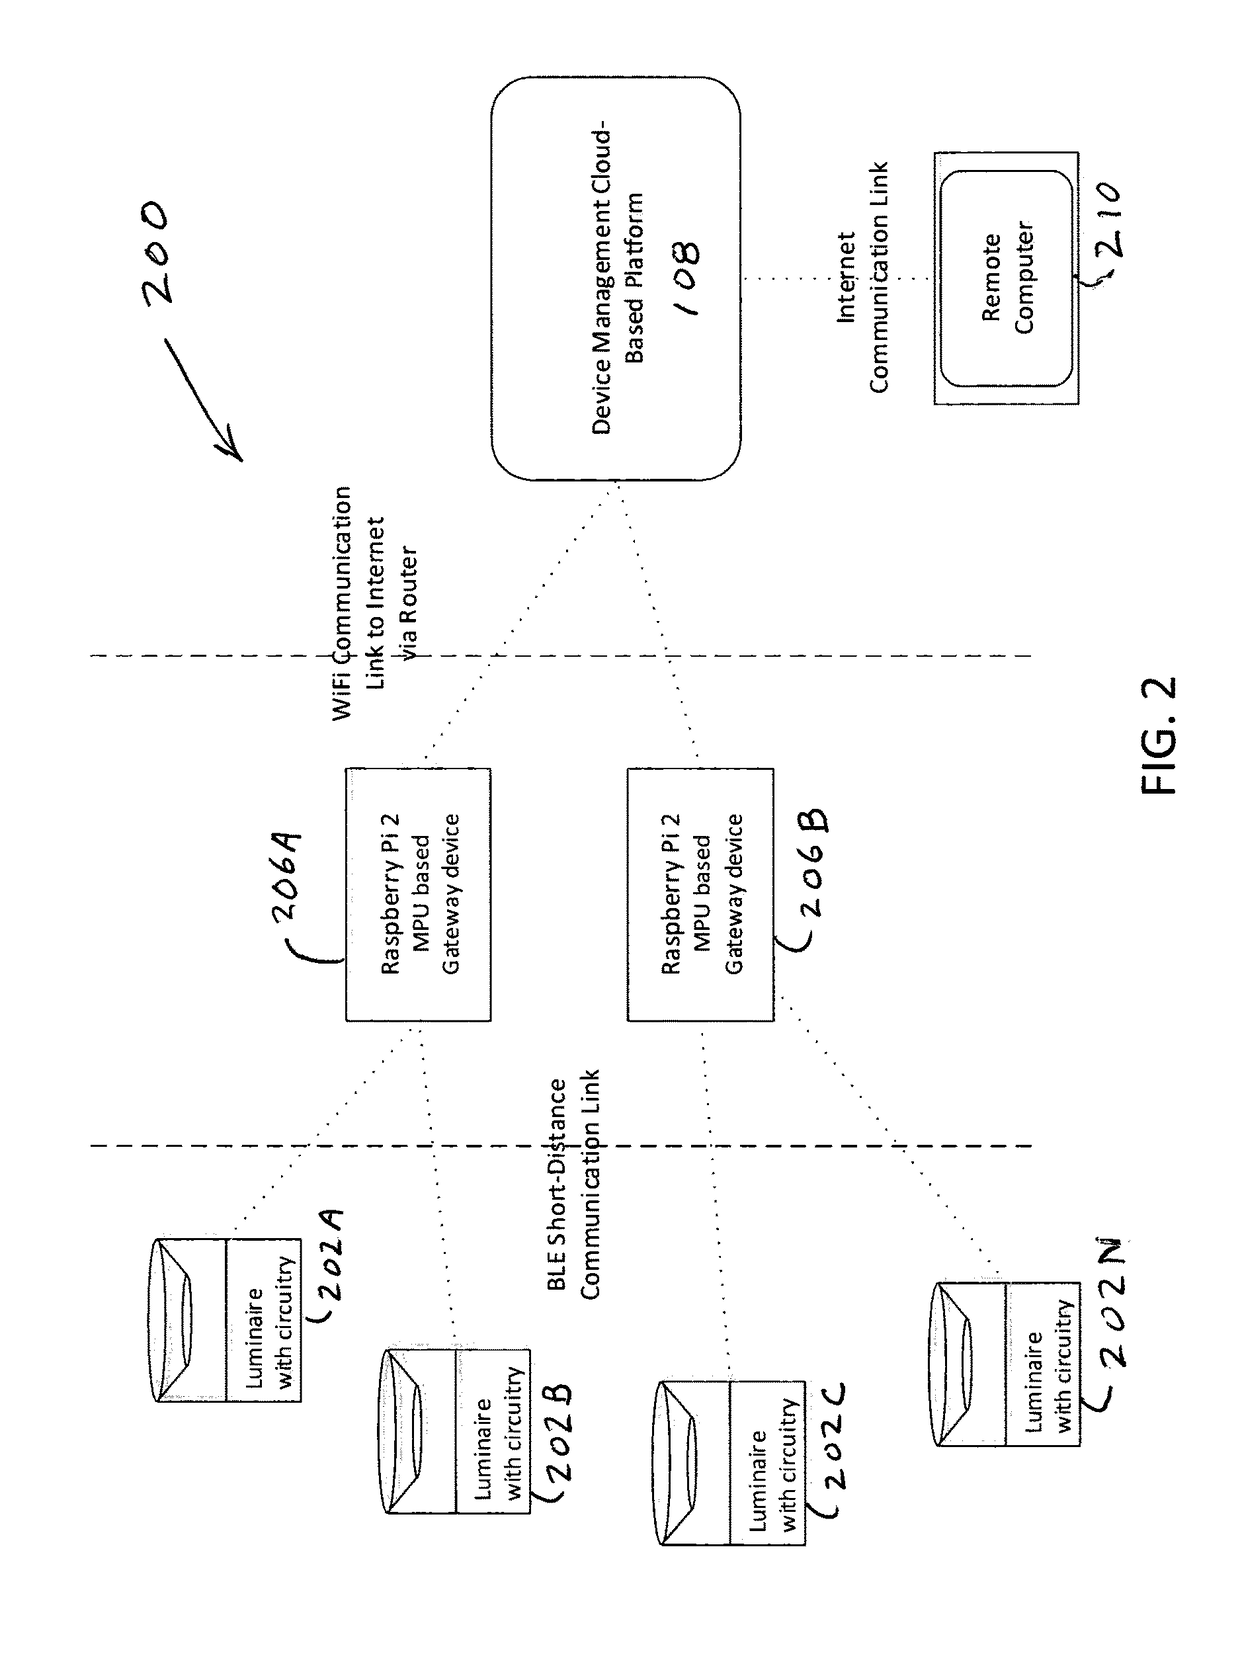 Remote controlled LED based id emitter and deployment, and application of same to multi-factor authentication